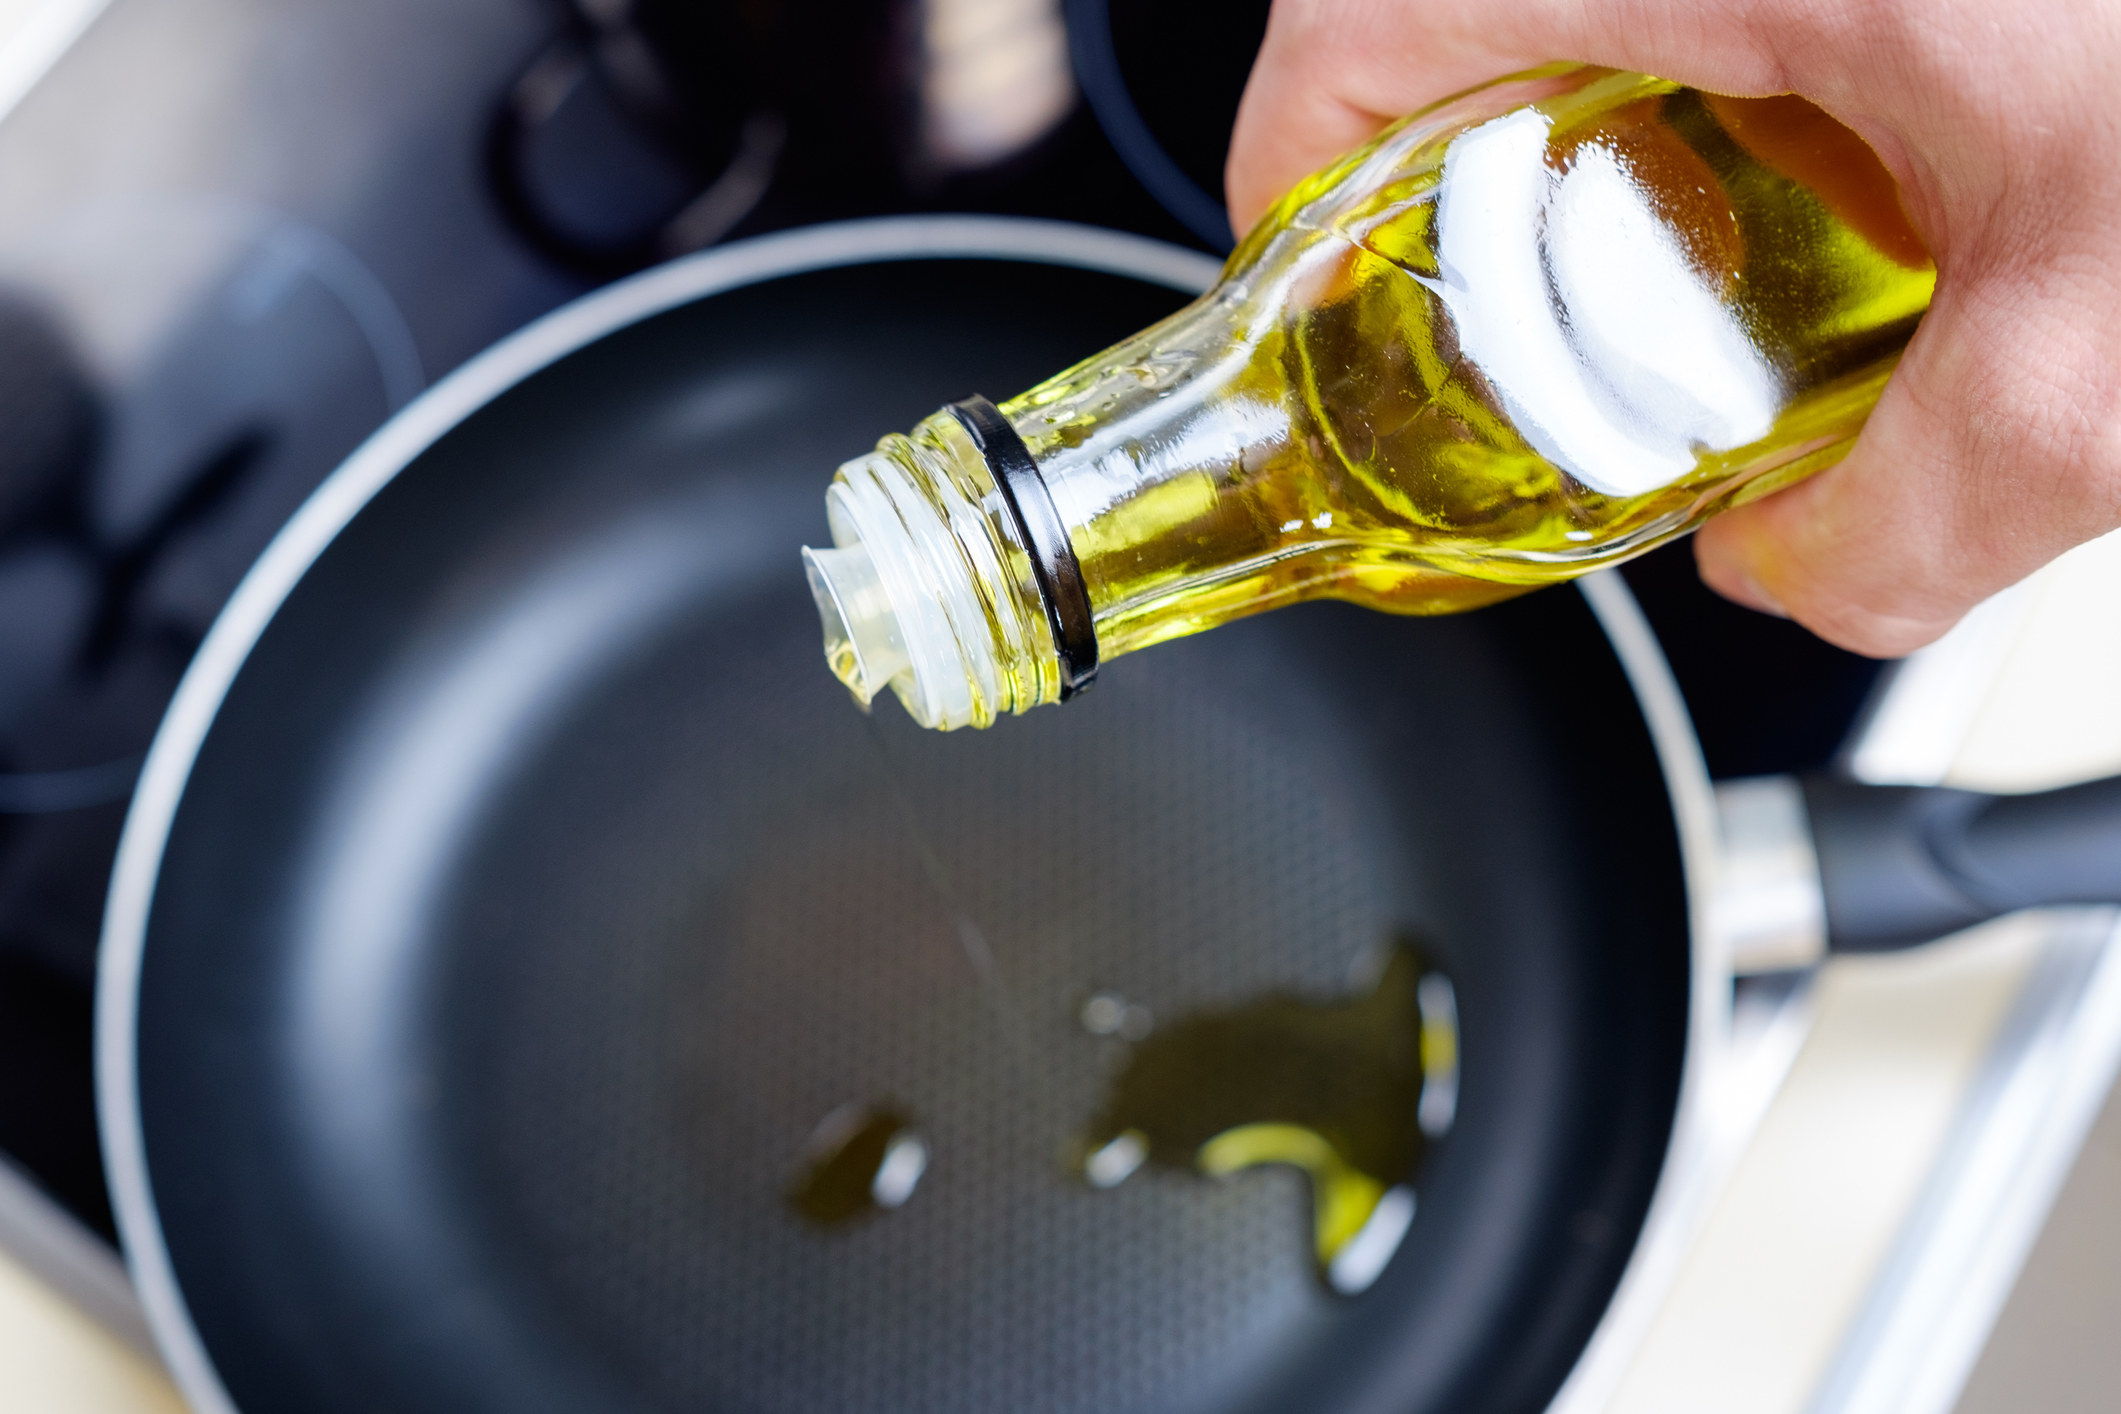 Pouring oil from a bottle into a skillet.